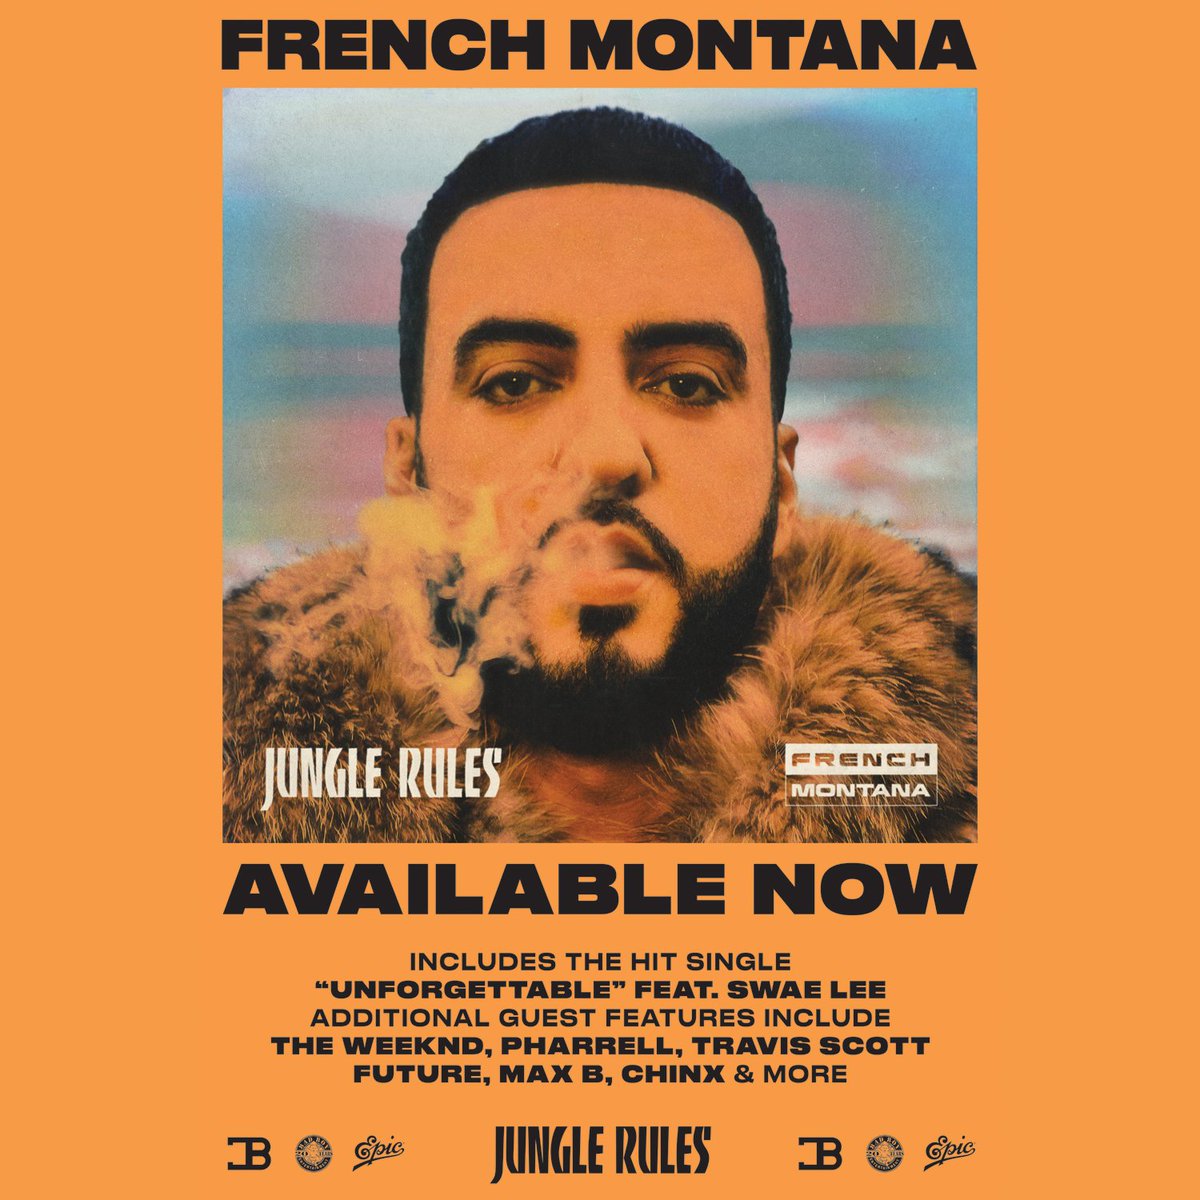 French montana ft. French Montana Jungle Rules. Unforgettable French Montana. Unforgettable French Montana обложка. Обложка French Montana Jungle Rules.